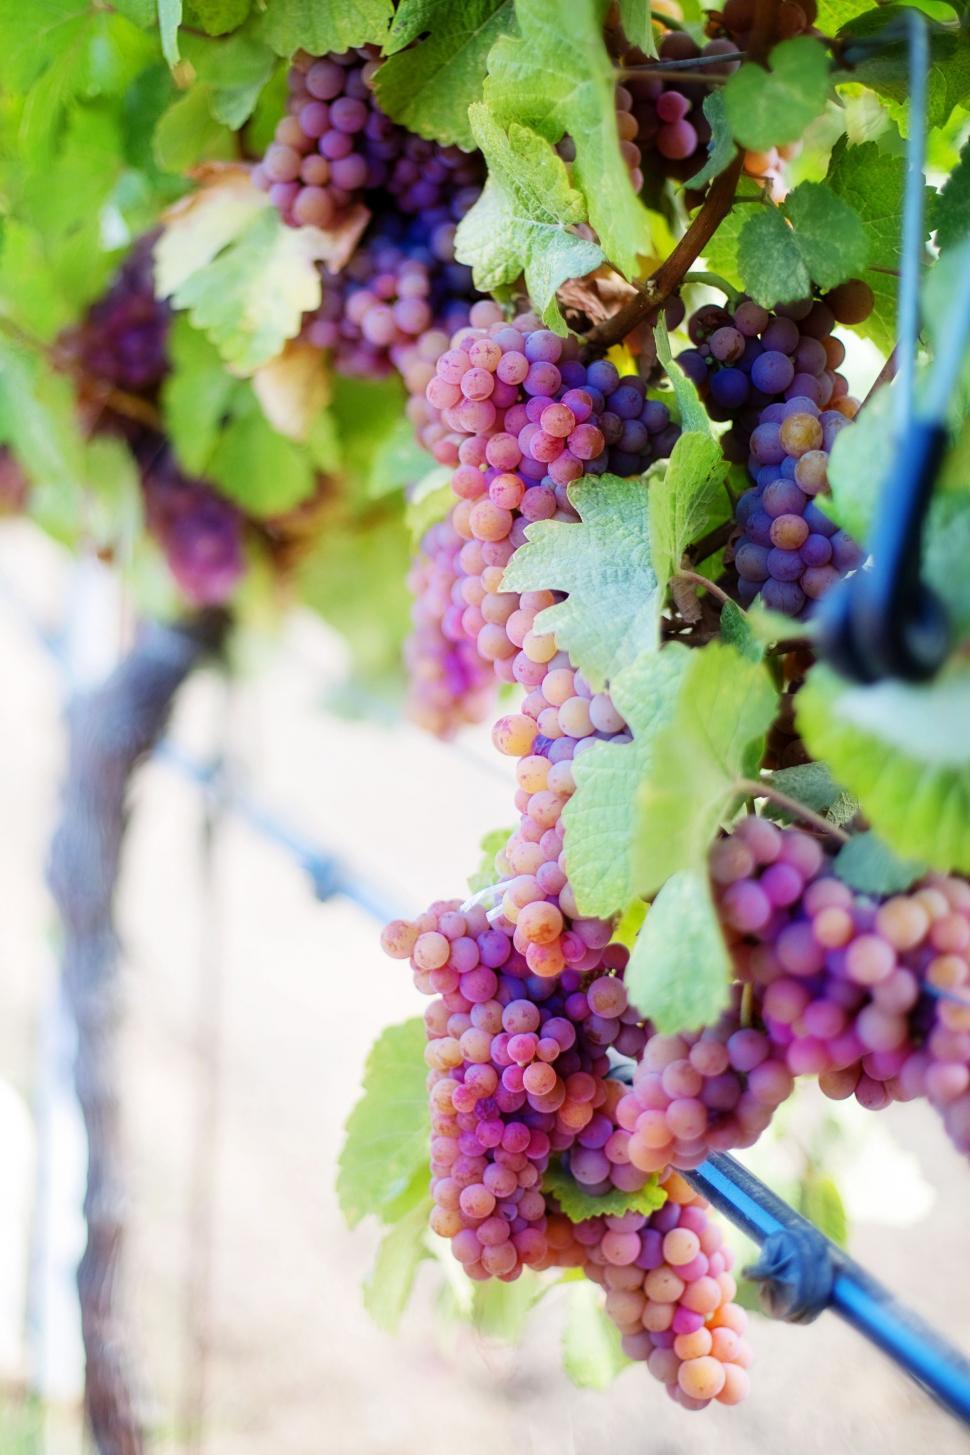 Free Image of Grape Cluster 